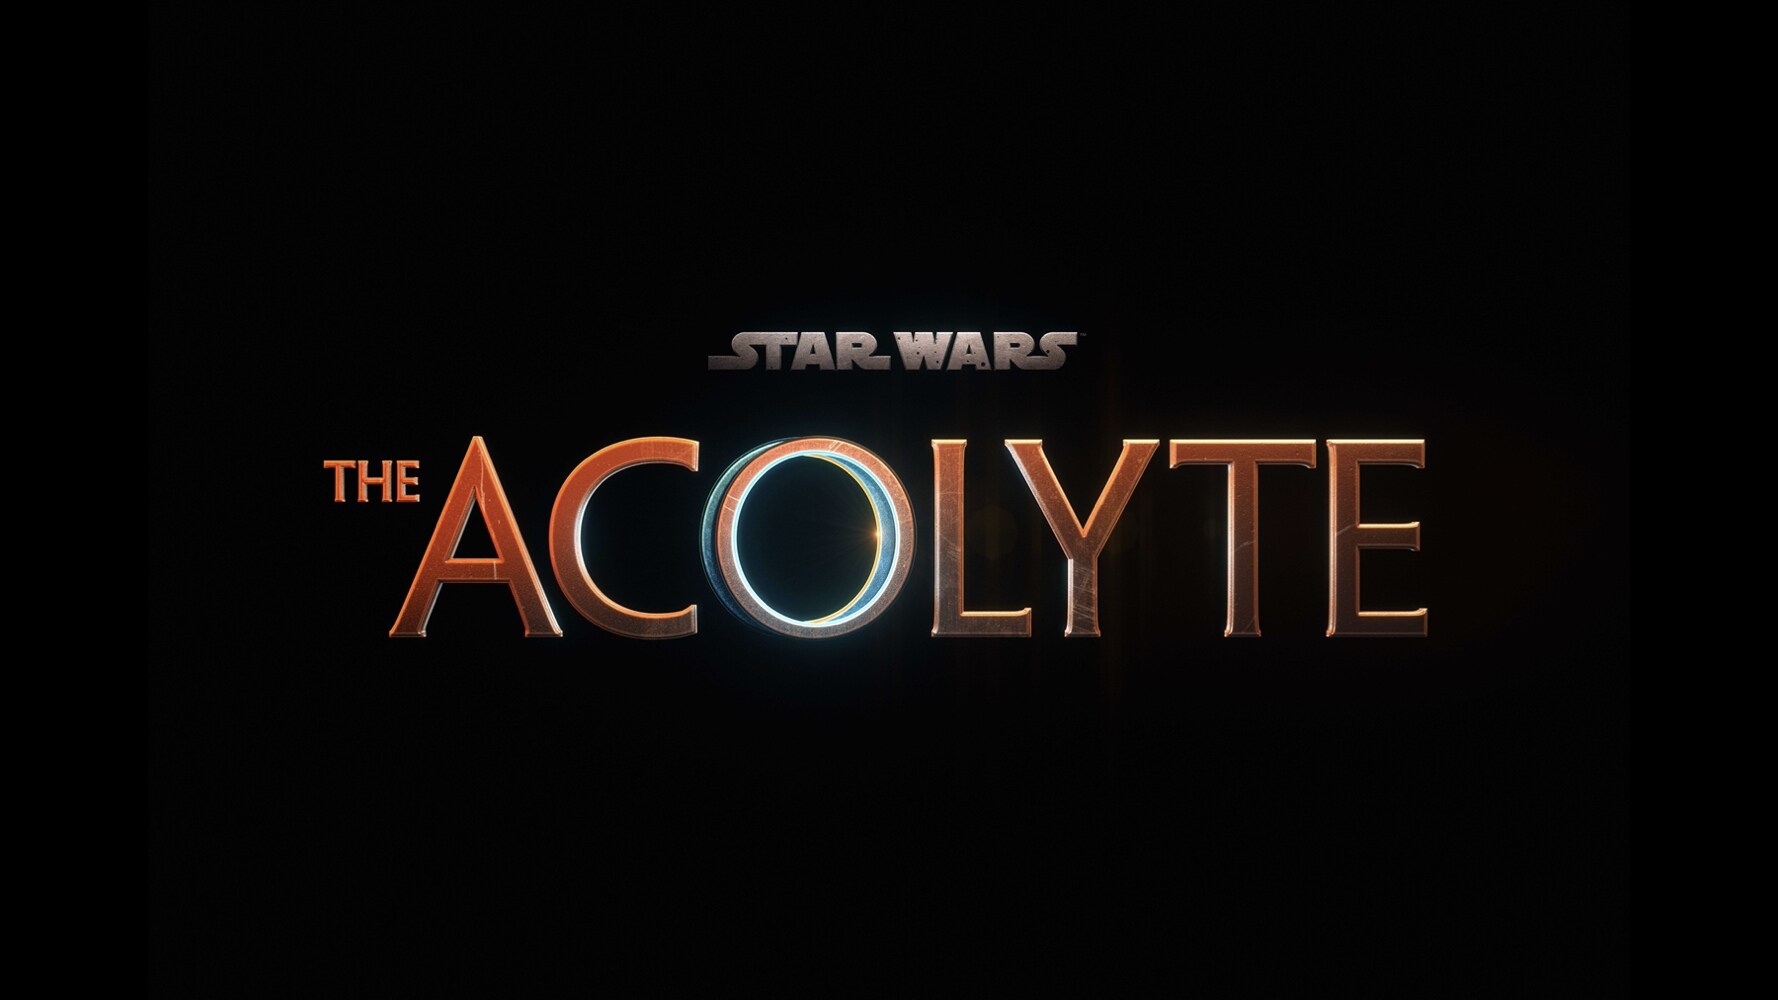 Disney+ Shares Photos from “The Acolyte” Launch Event